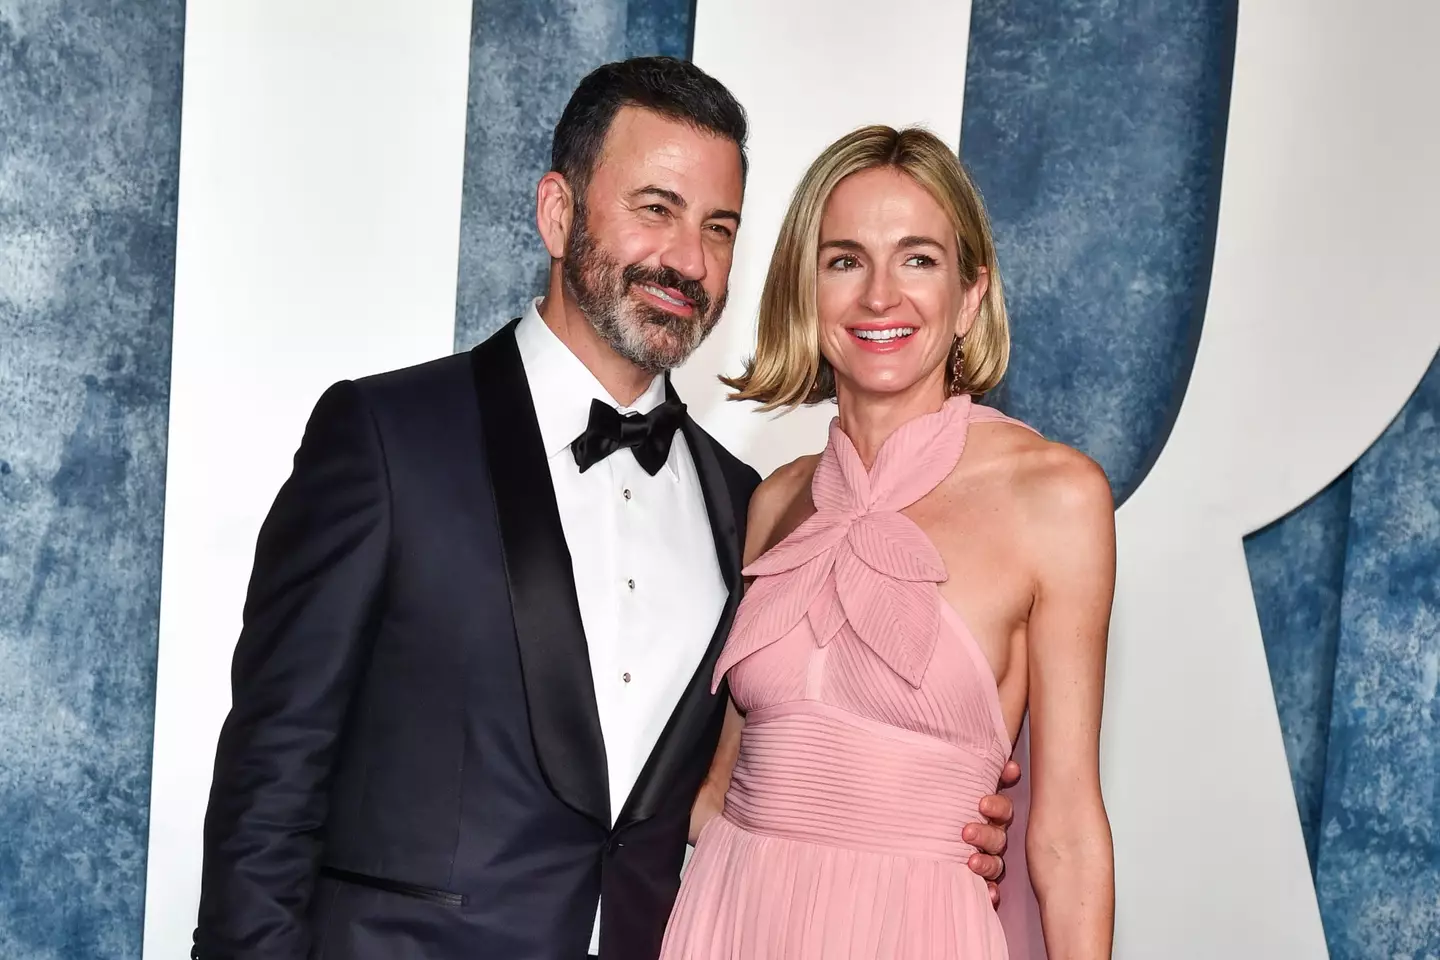 Jimmy Kimmel worked with his wife Molly McNearney on the Oscars.